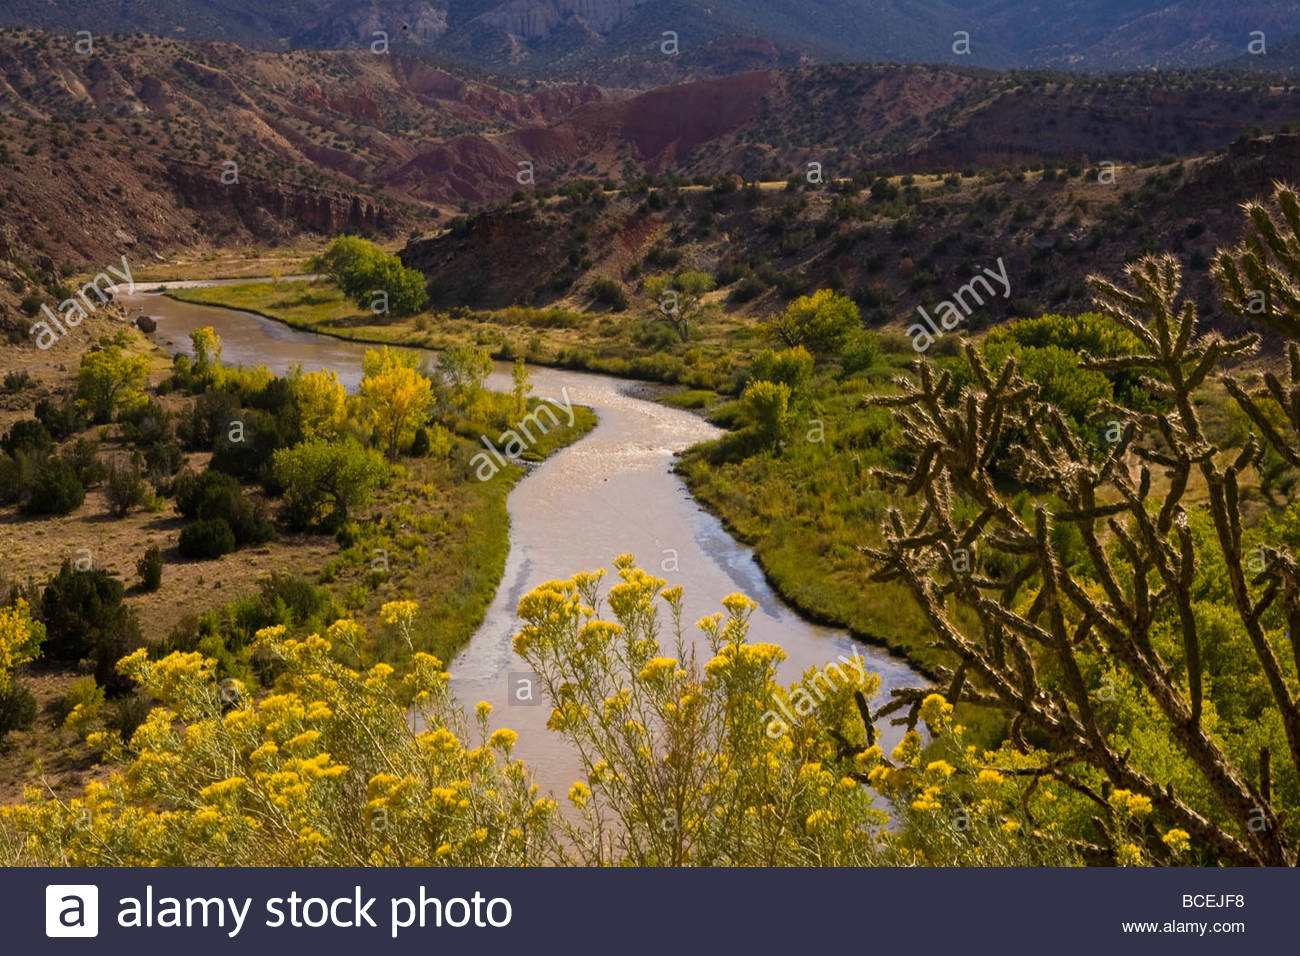 Wildflowers grow along the Chama River in Georgia O'Keeffe country. Stock Photo